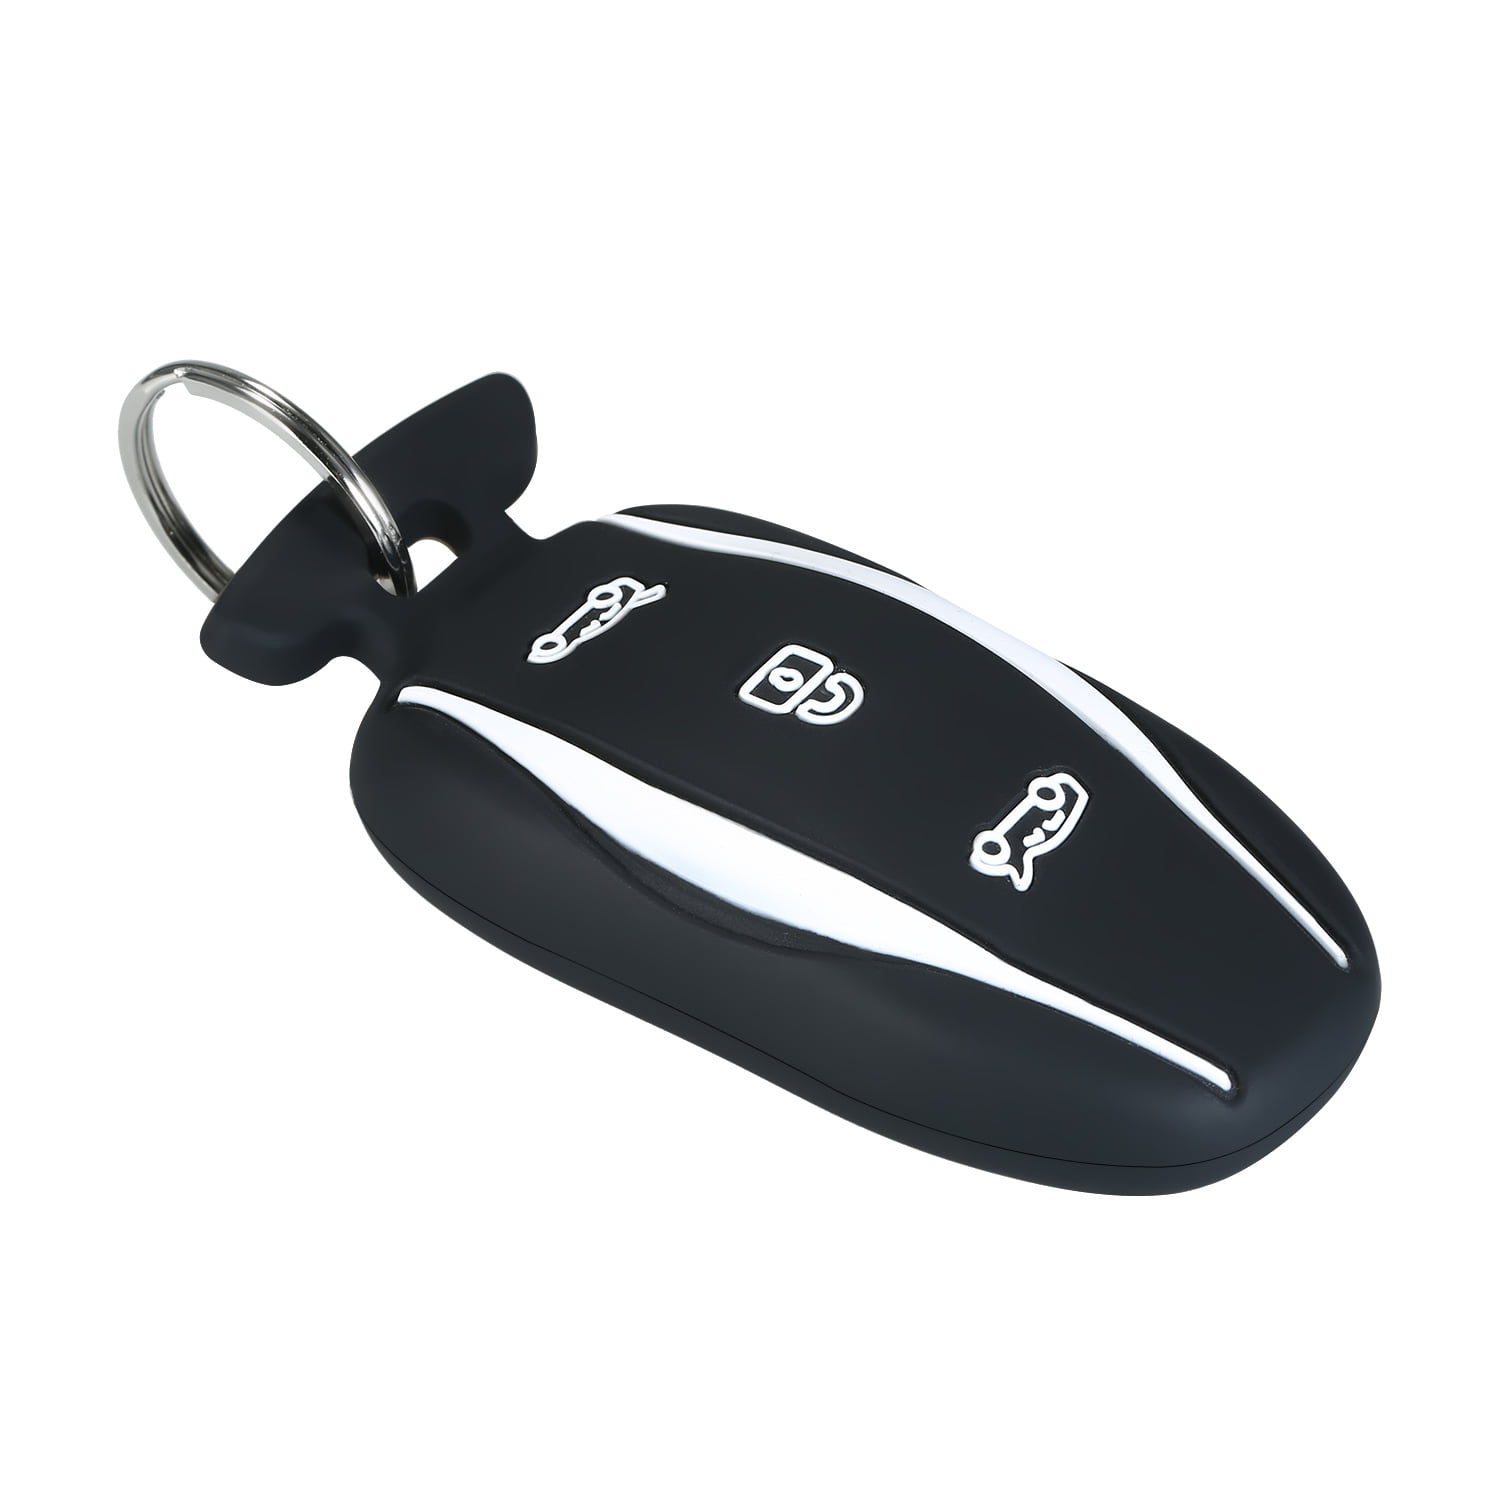 Tesla Gear Silicon Key Fob Cover Keychain Replacement for Tesla Model X Black 